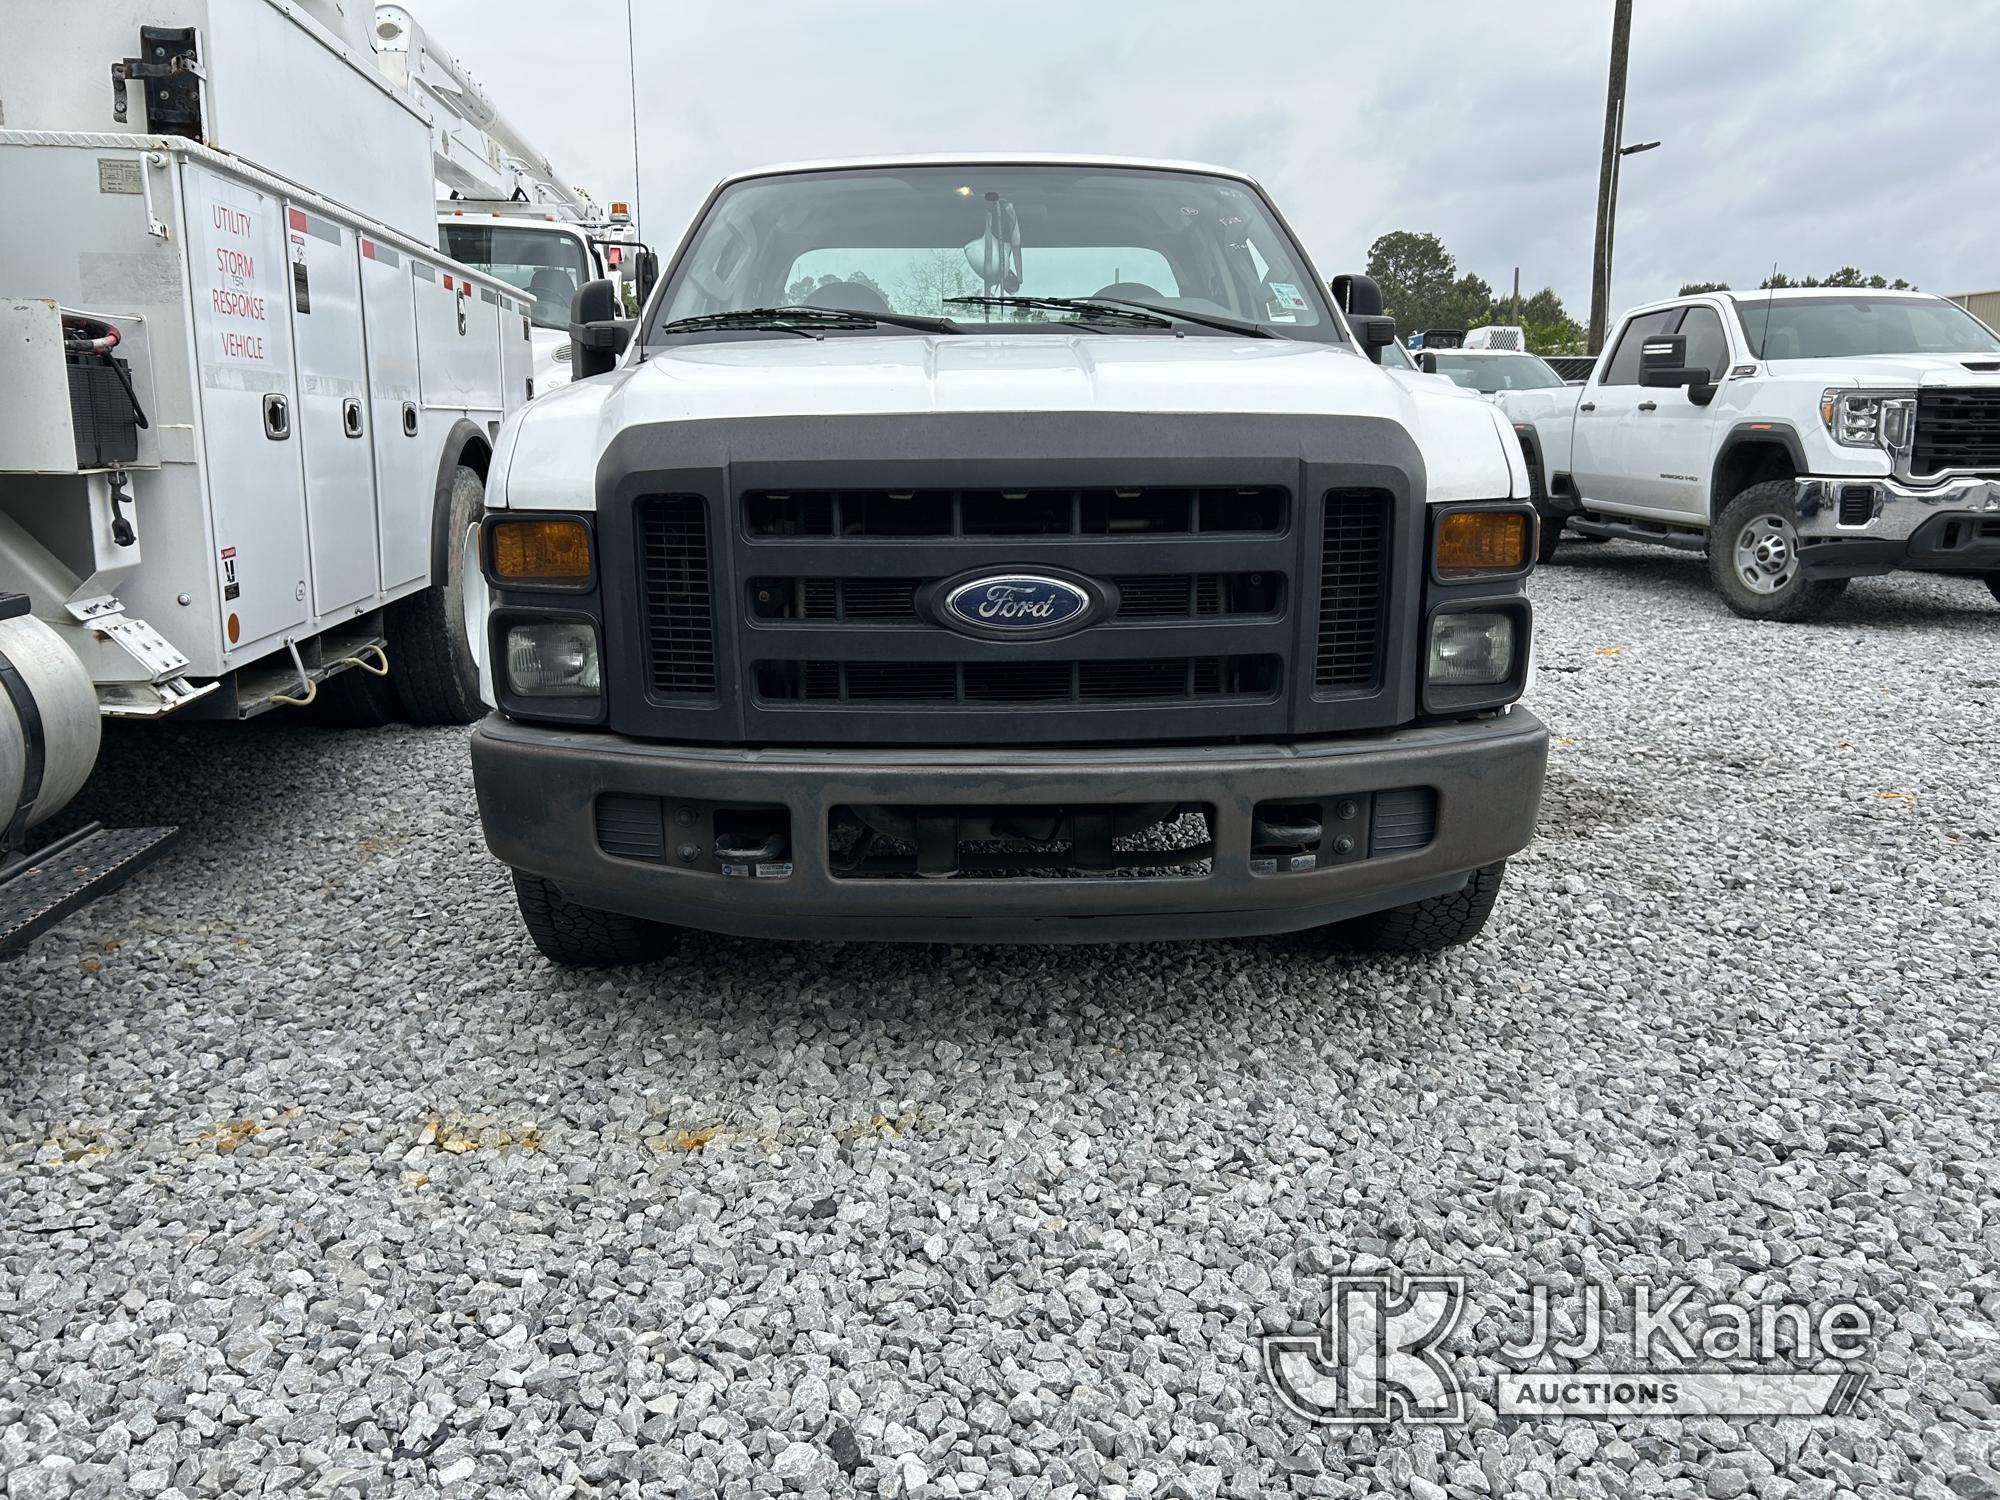 (Covington, LA) 2009 Ford F250 Extended-Cab Pickup Truck Runs Does Not Move, Transmission Is In Bad